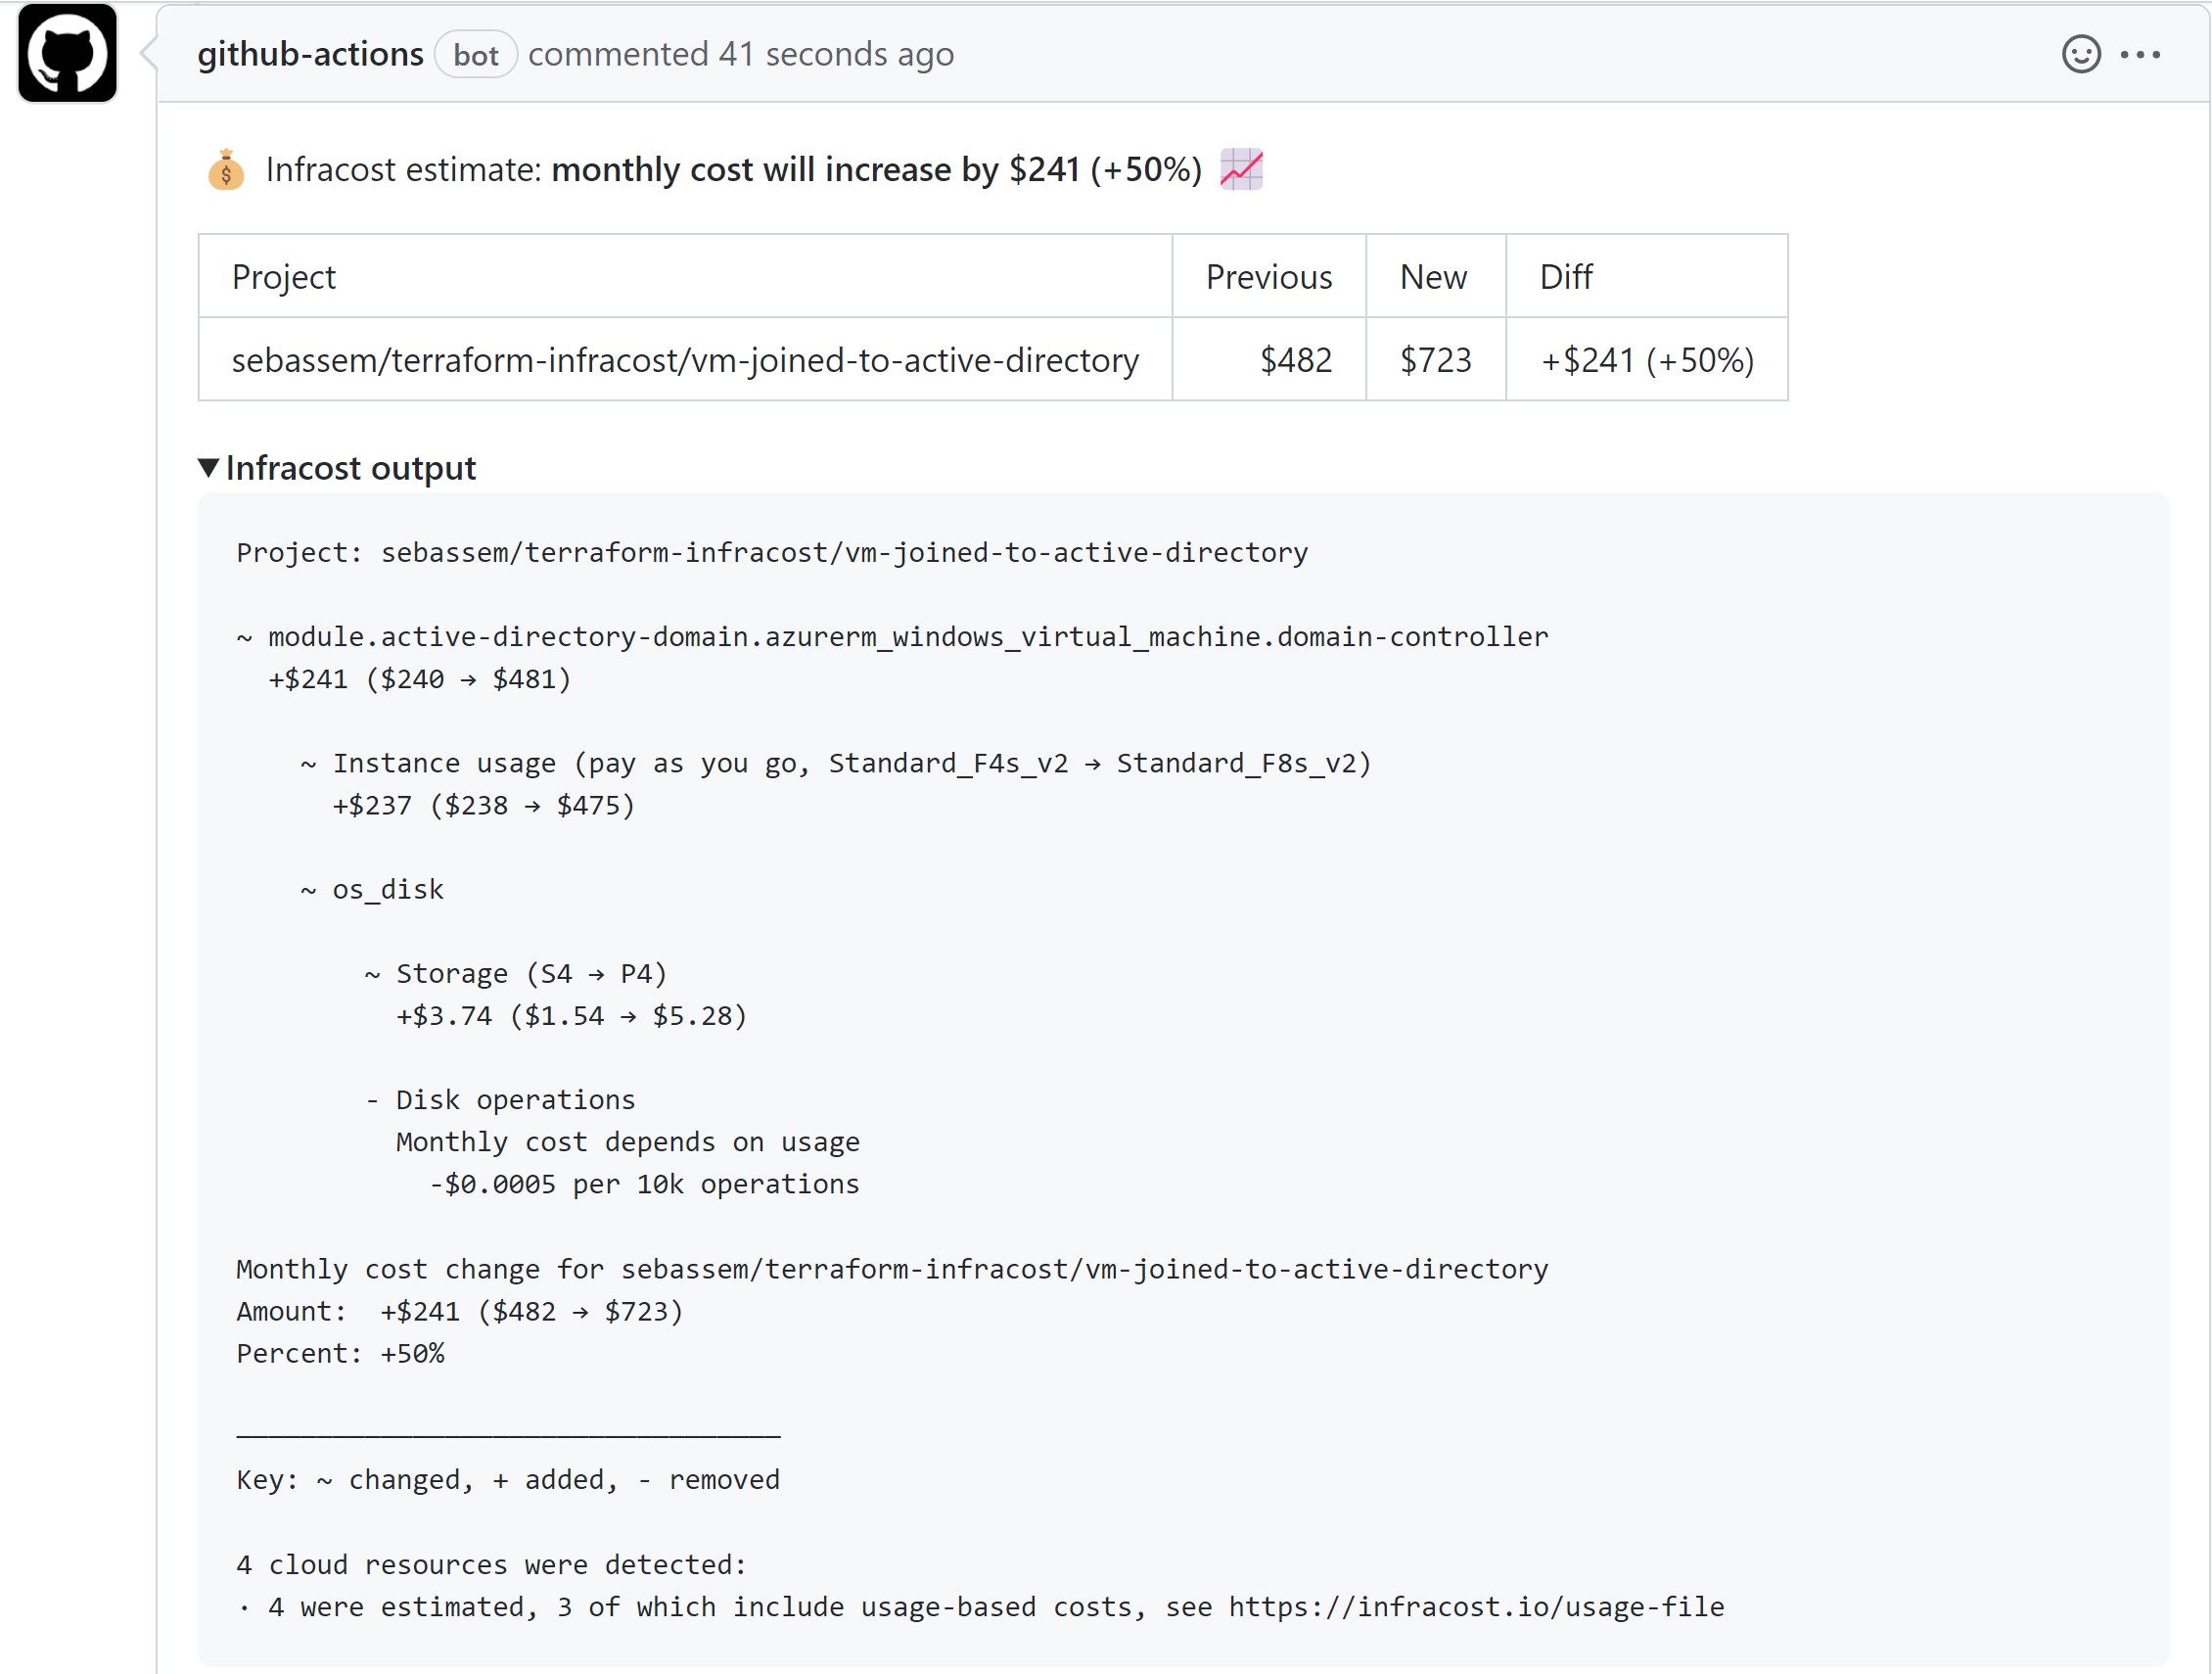 Screenshot showing the pull request details